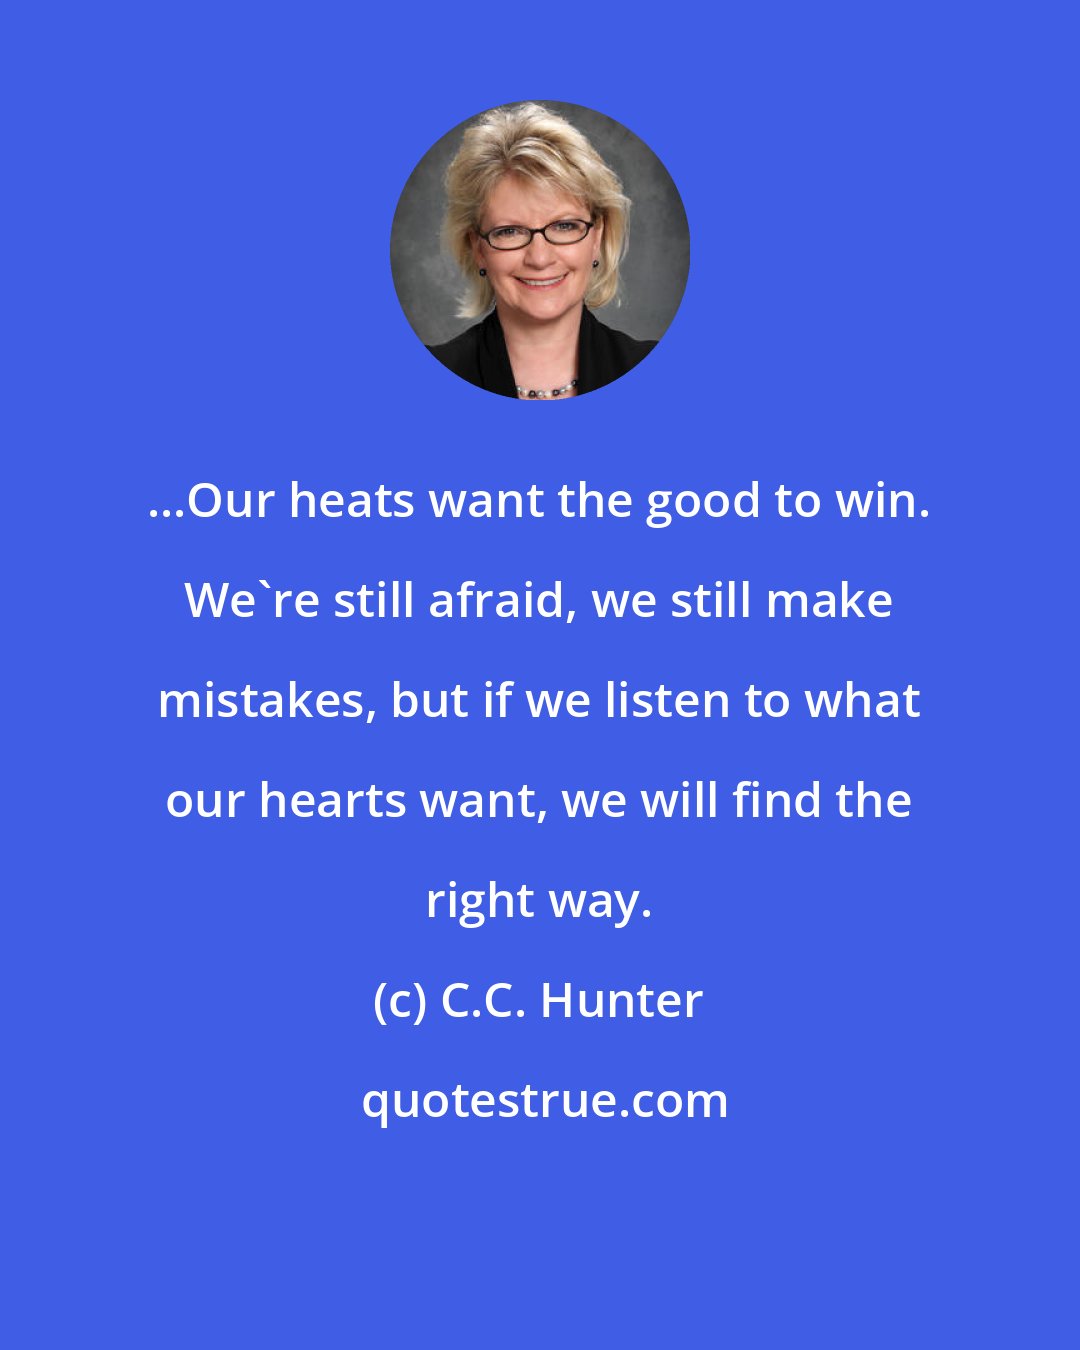 C.C. Hunter: ...Our heats want the good to win. We're still afraid, we still make mistakes, but if we listen to what our hearts want, we will find the right way.